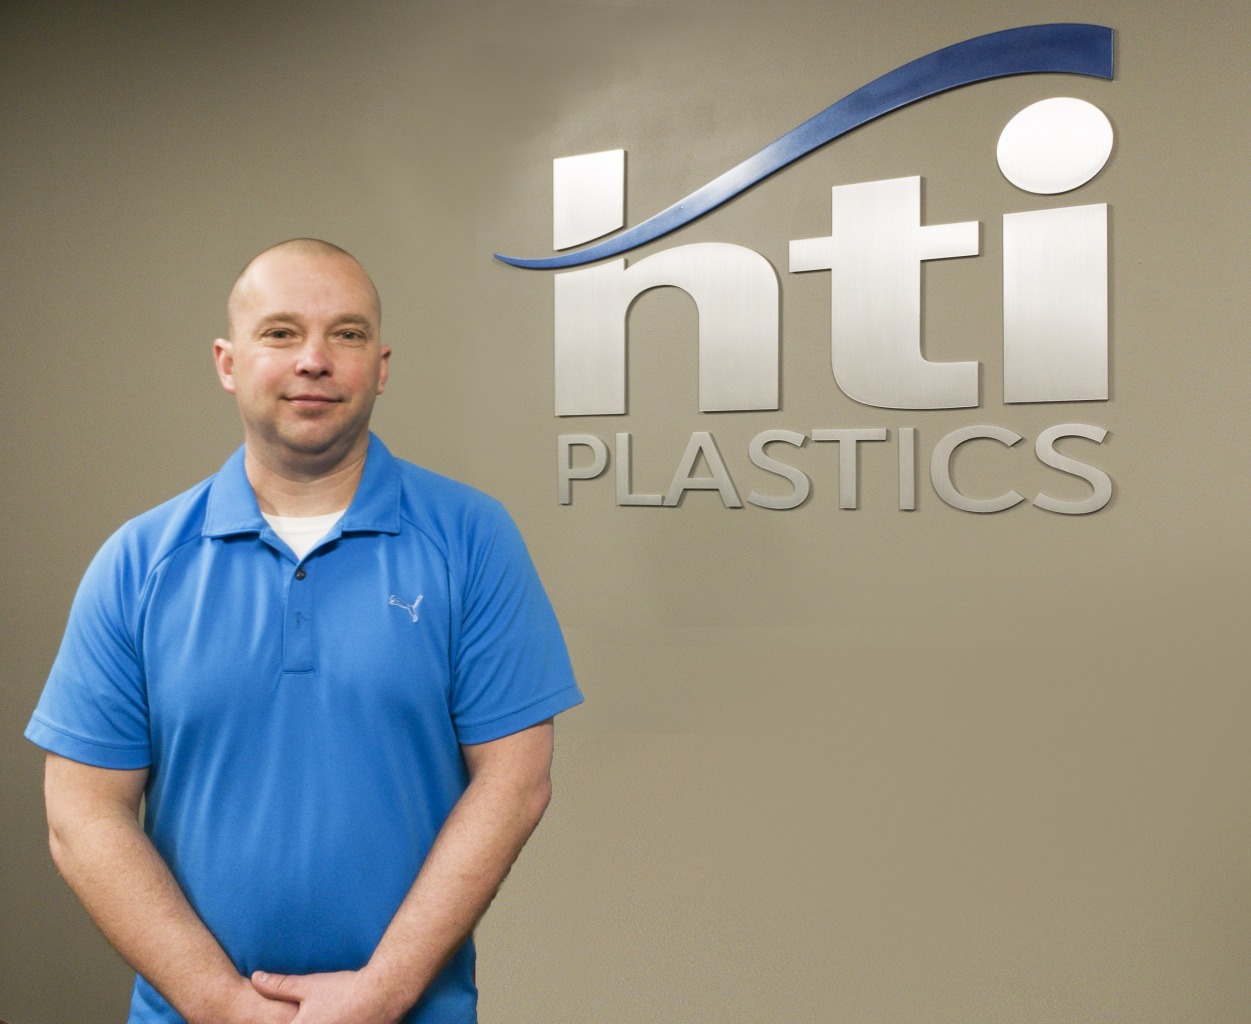 HTI Plastics Promotes Brent Beerenstrauch to Manufacturing Engineer